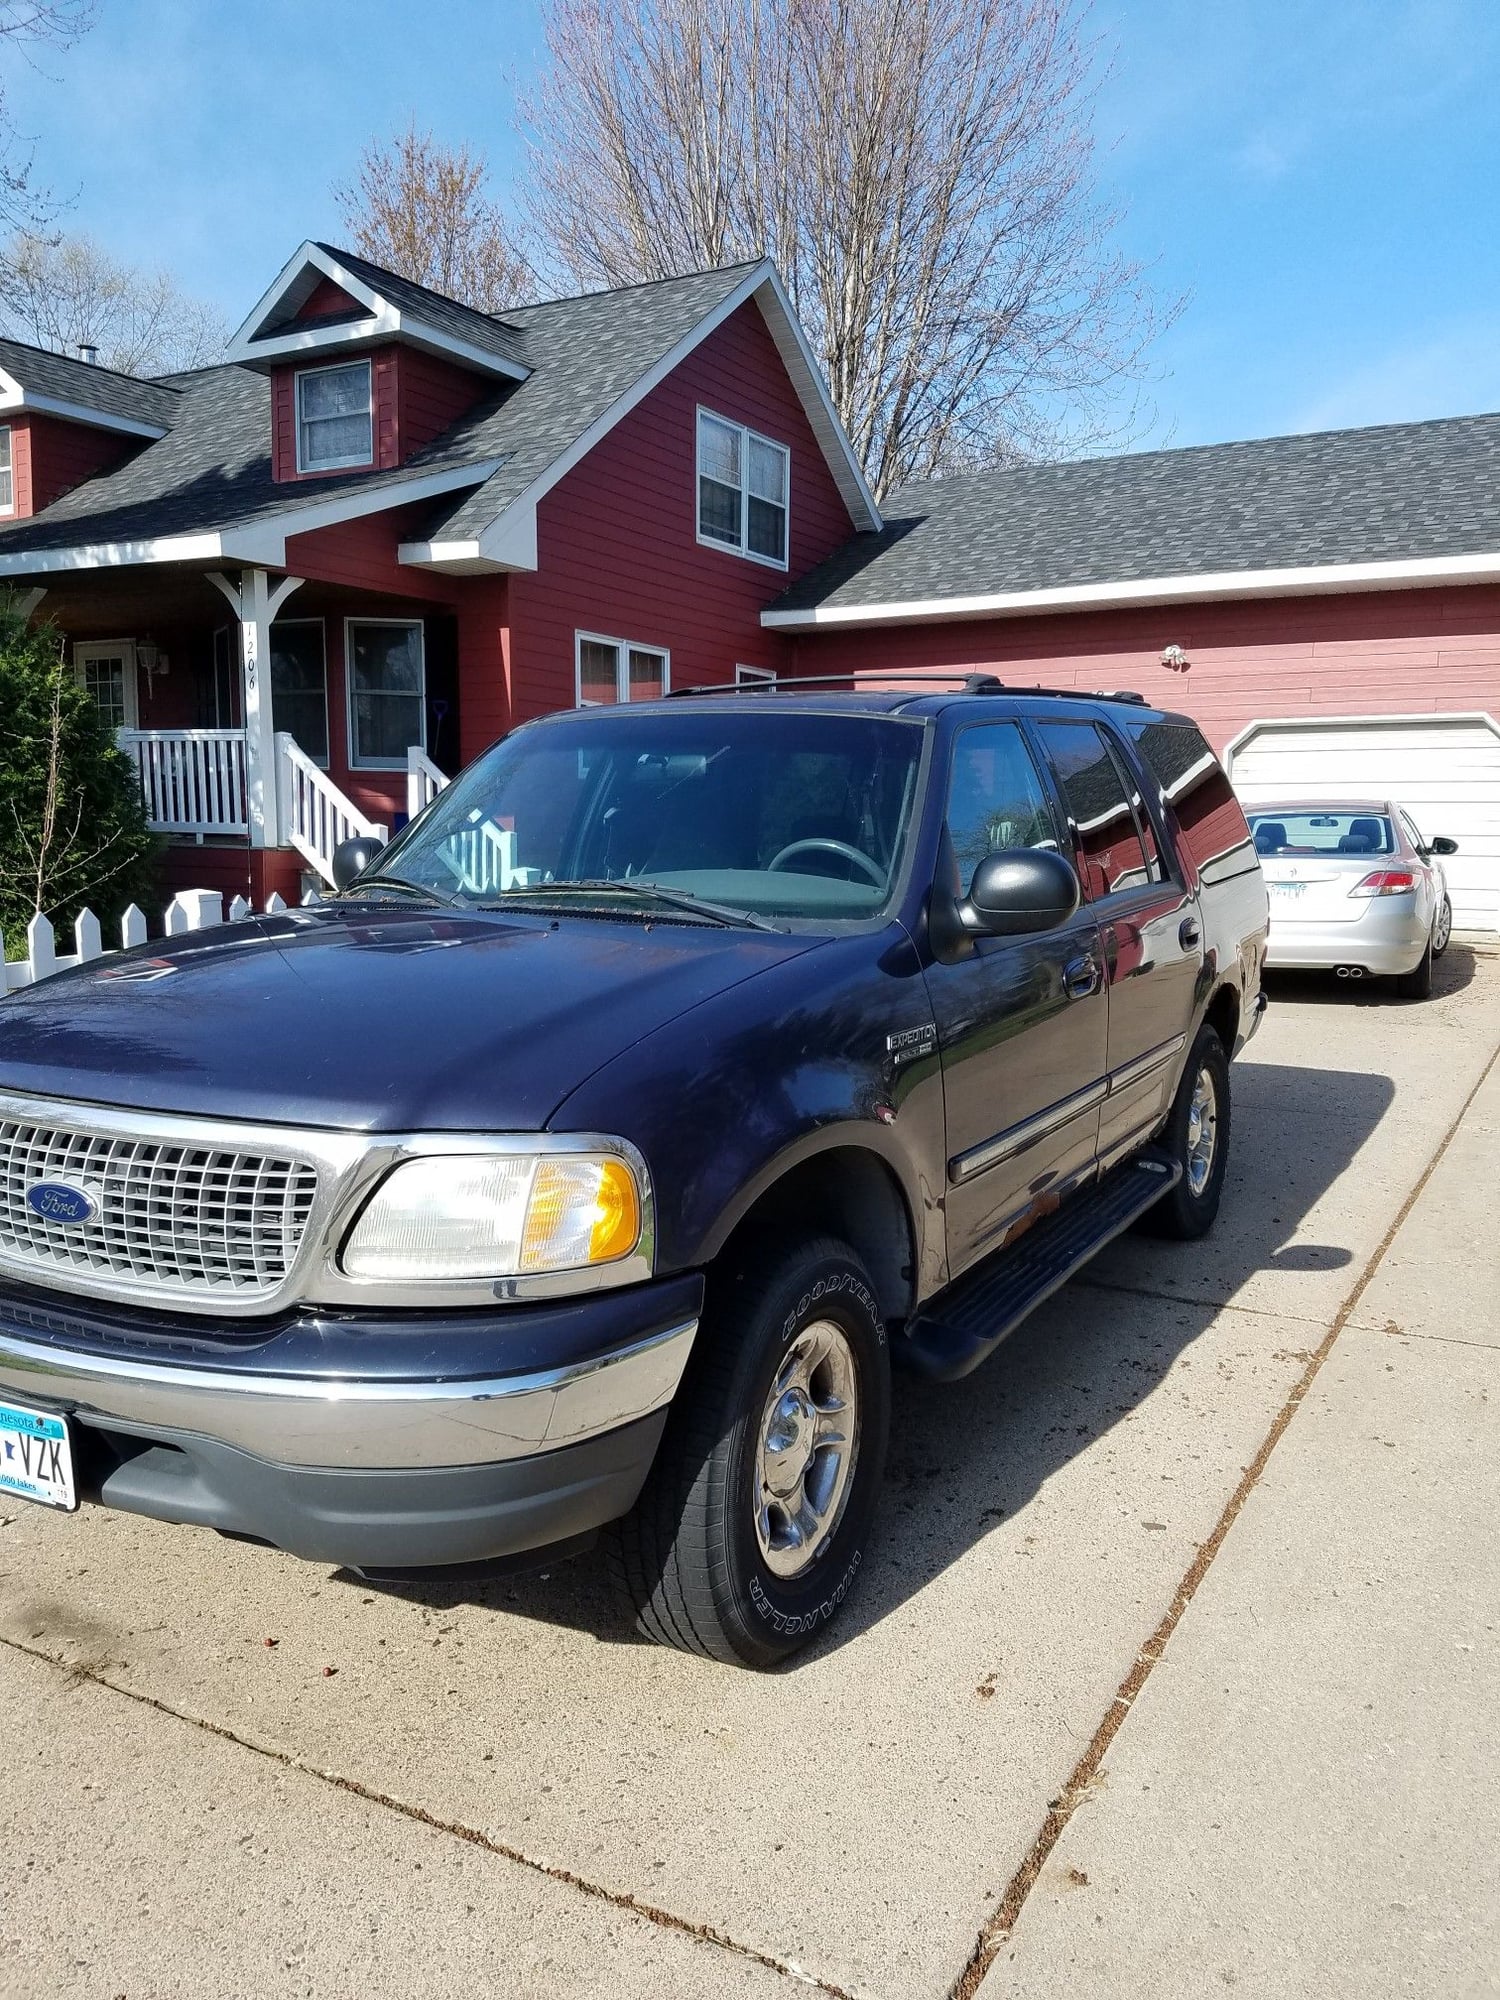 1999 Ford Expedition - 1999 Expedition - Used - VIN 1FMPU18L9XLC10866 - 164,000 Miles - 8 cyl - 4WD - Automatic - SUV - Blue - Forest Lake, MN 55025, United States